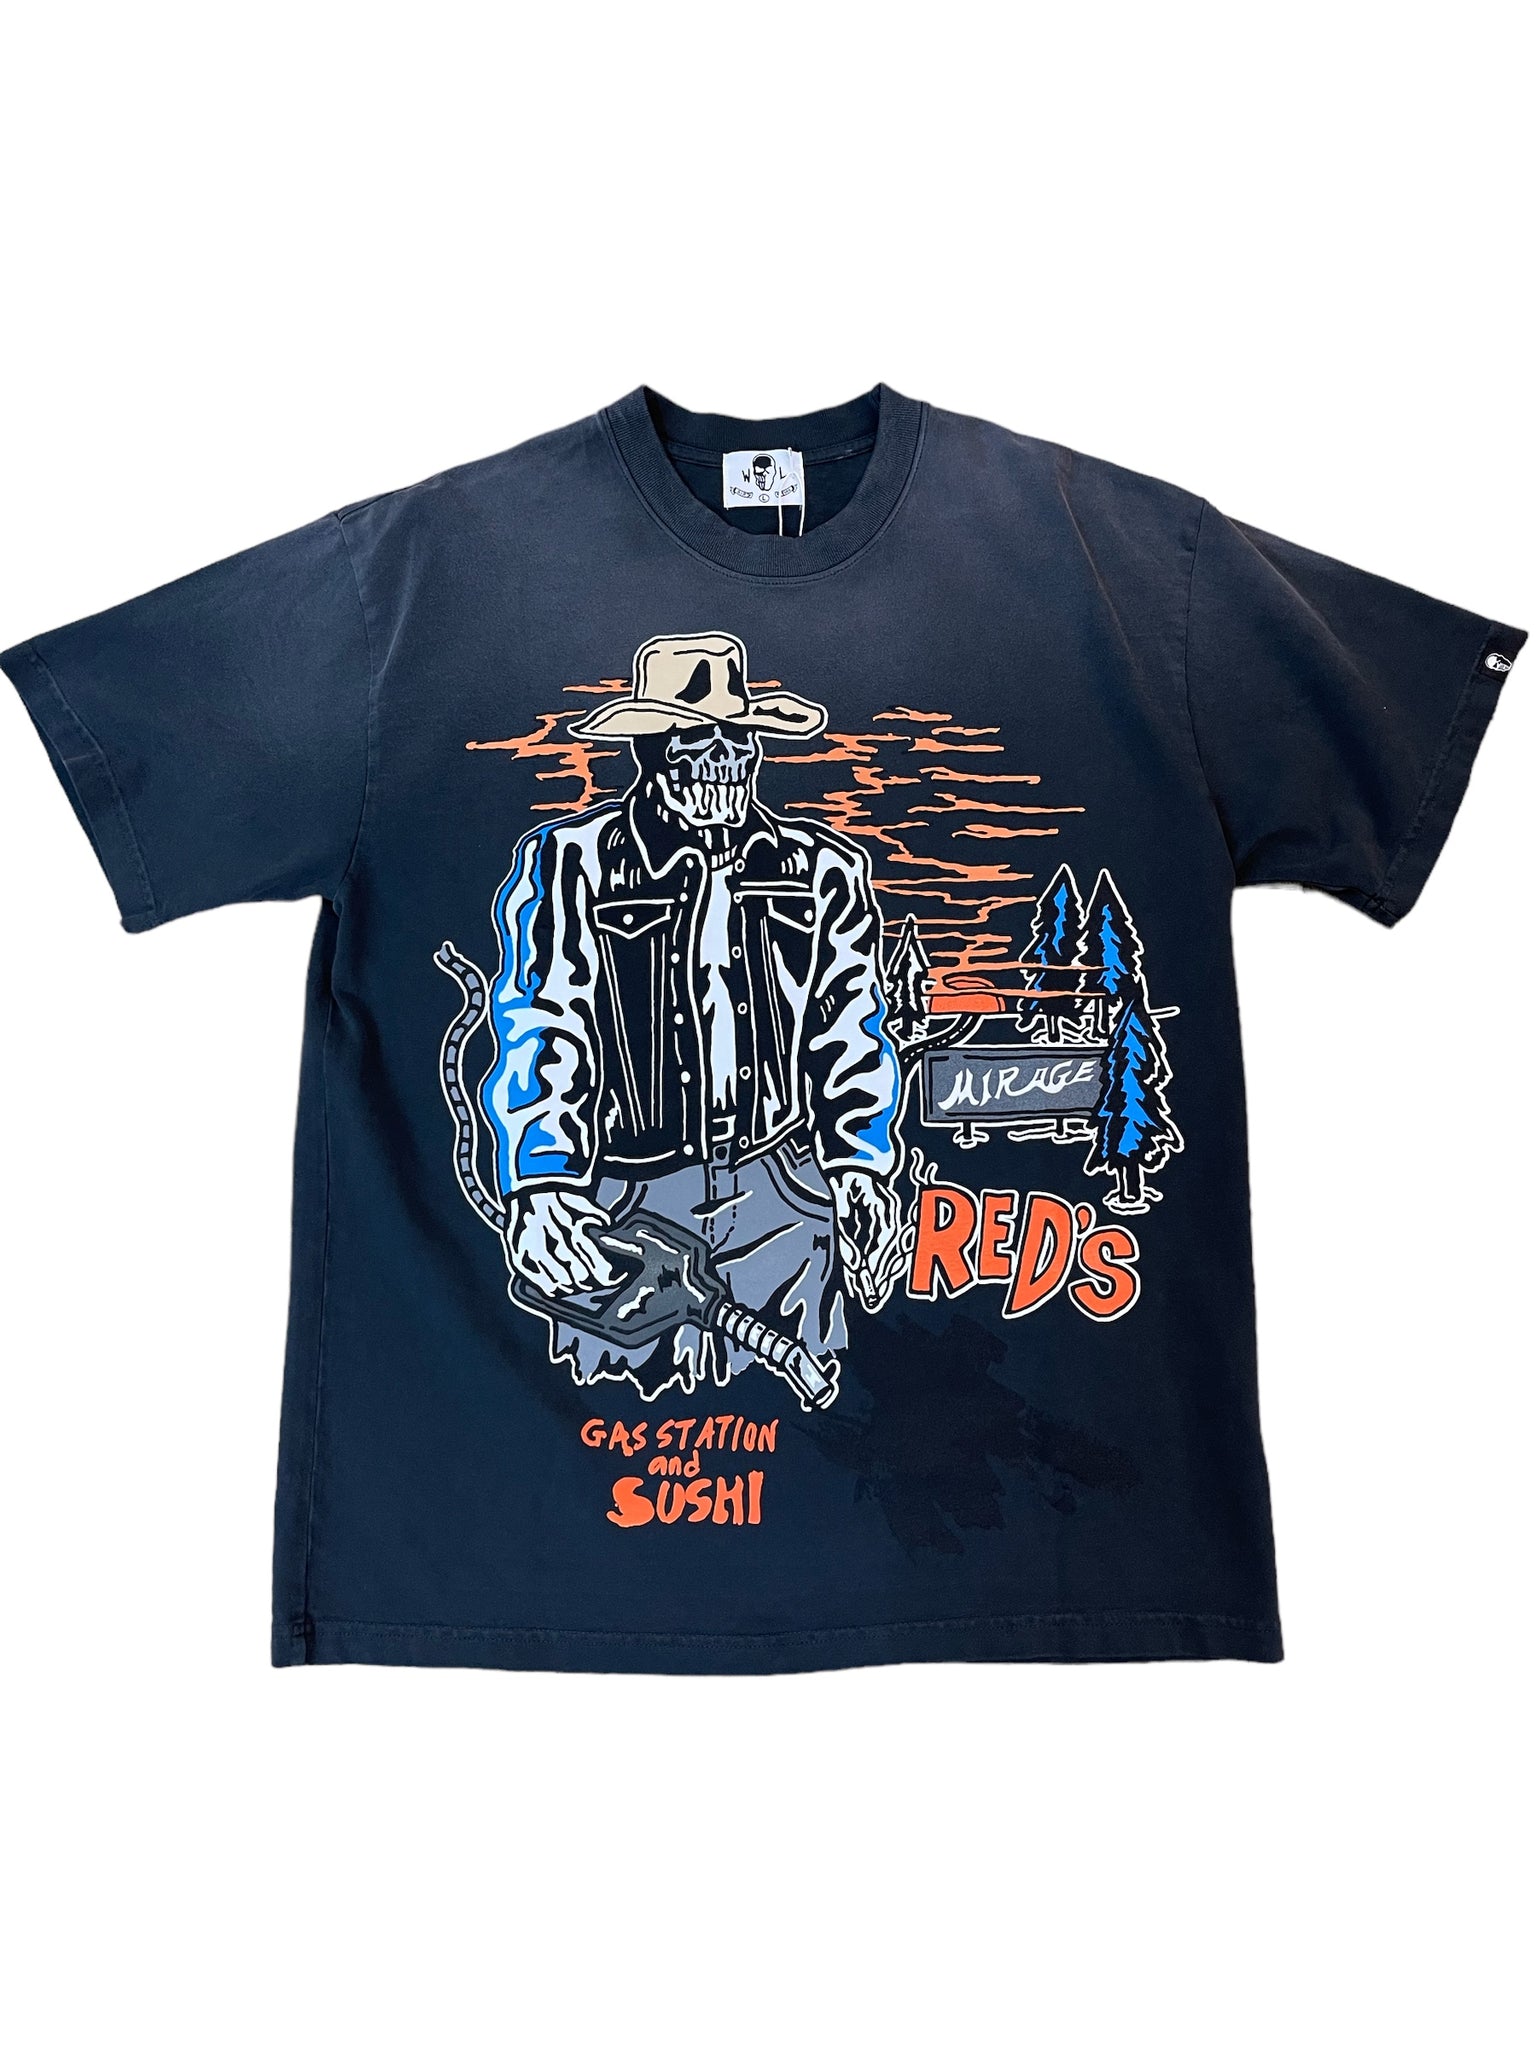 Warren Lotas Red's Country Gas Station and Sushi Tee "Washed Black"